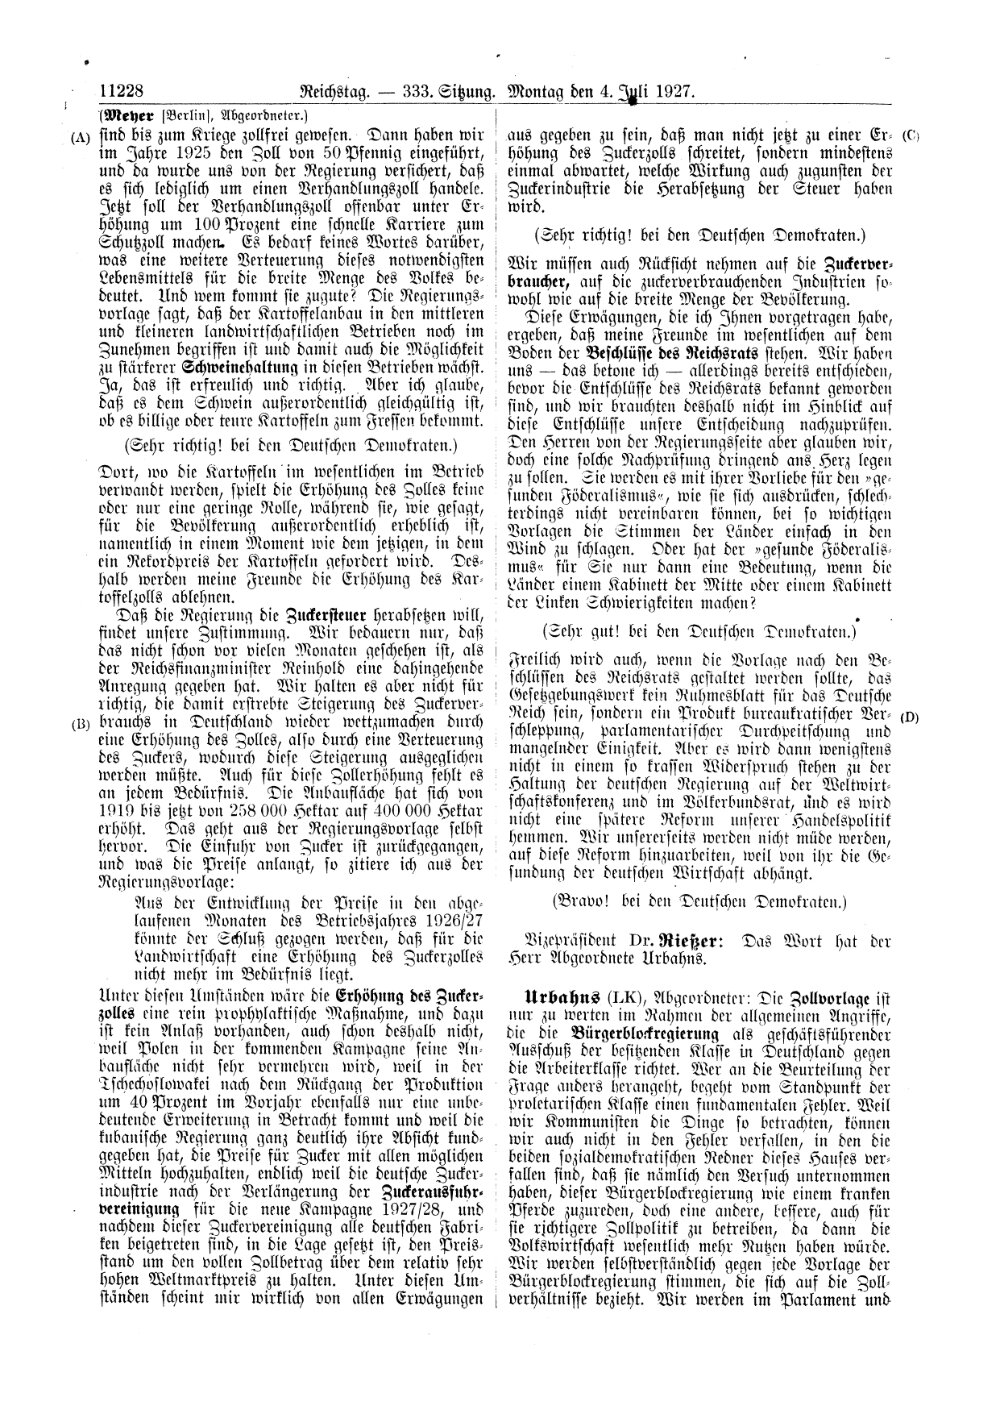 Scan of page 11228